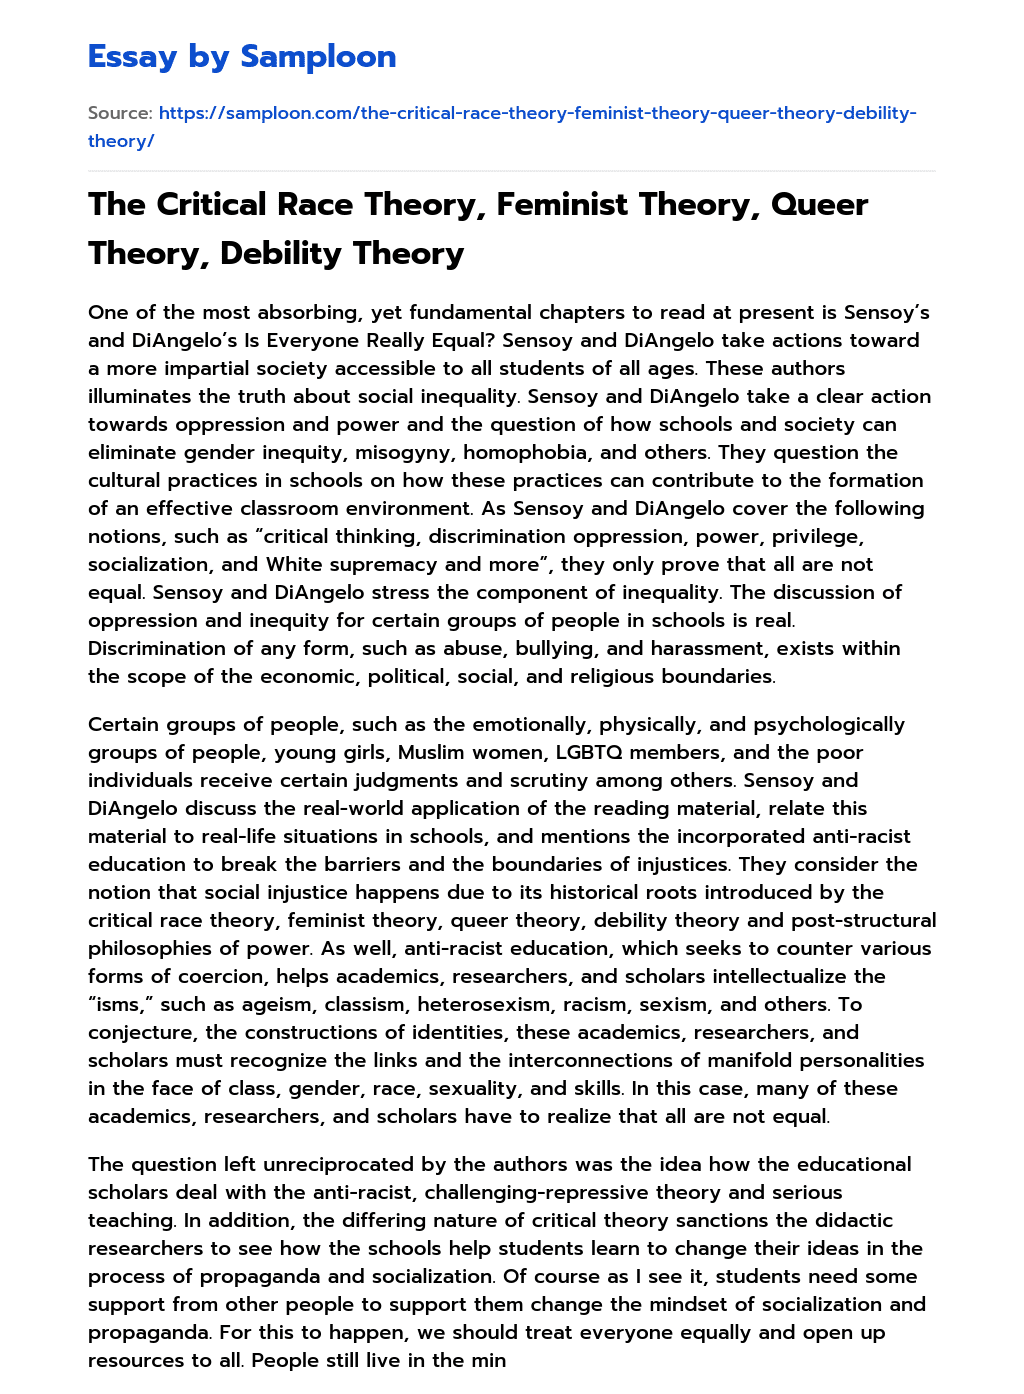 The Critical Race Theory, Feminist Theory, Queer Theory, Debility Theory essay